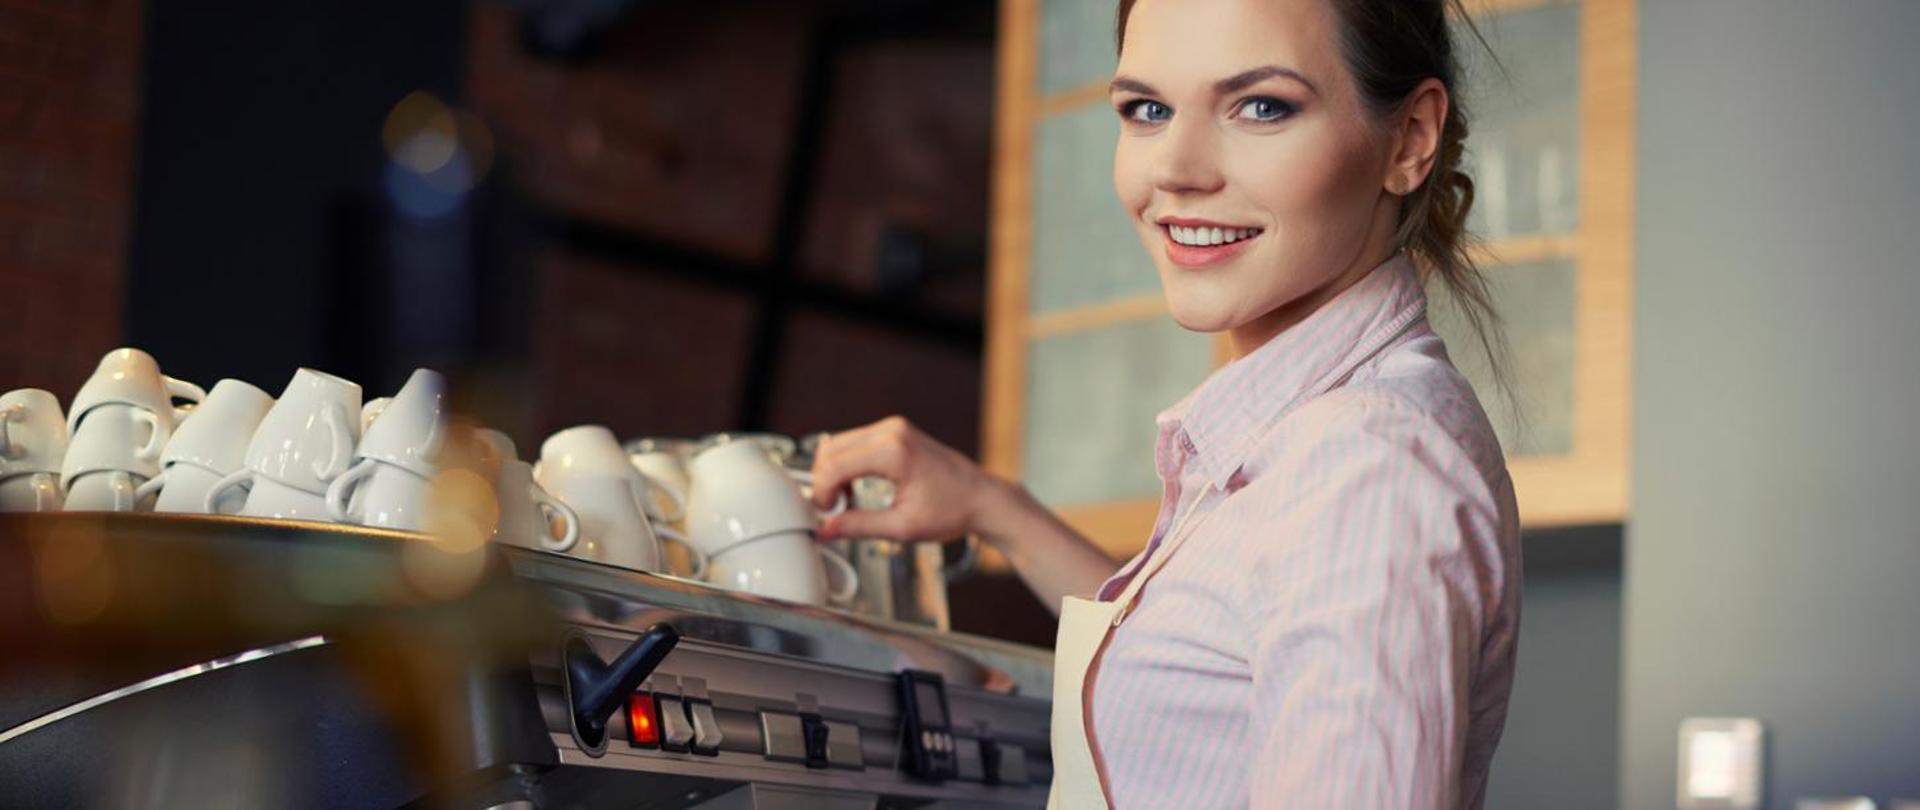 A portrait of a barista making coffee at the coffee machine.